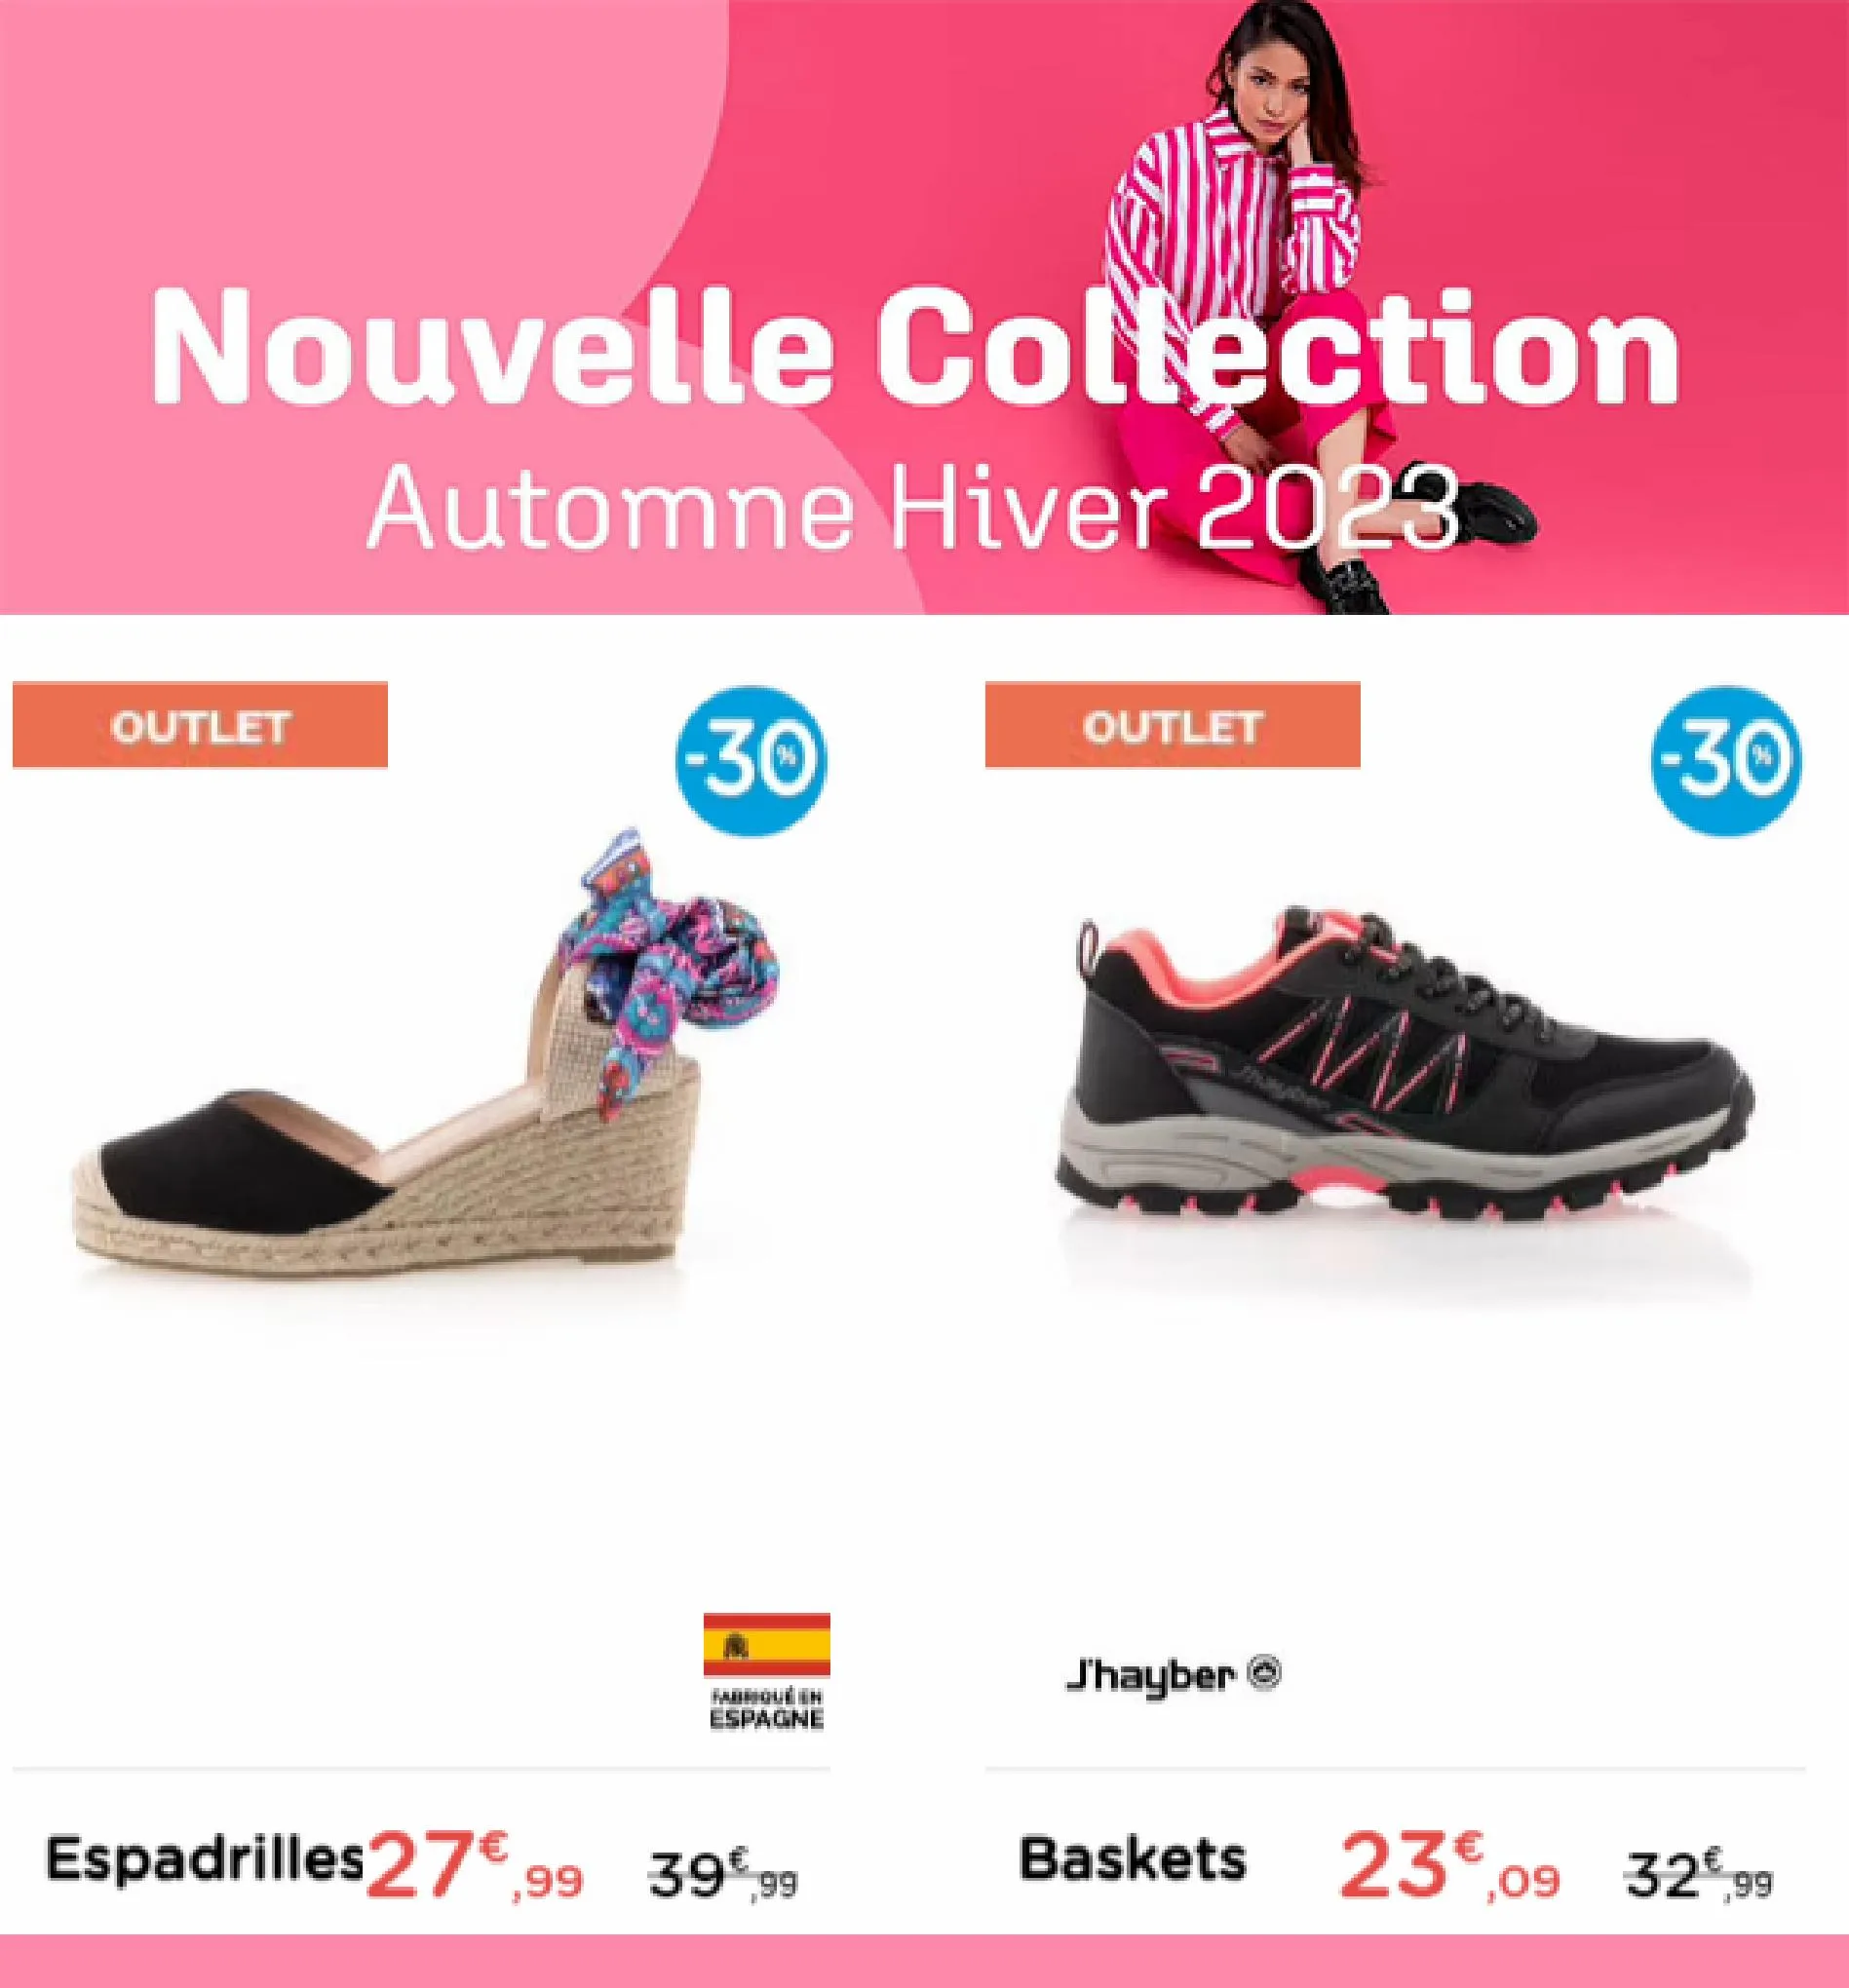 Catalogue Outlet -30% Besson, page 00003